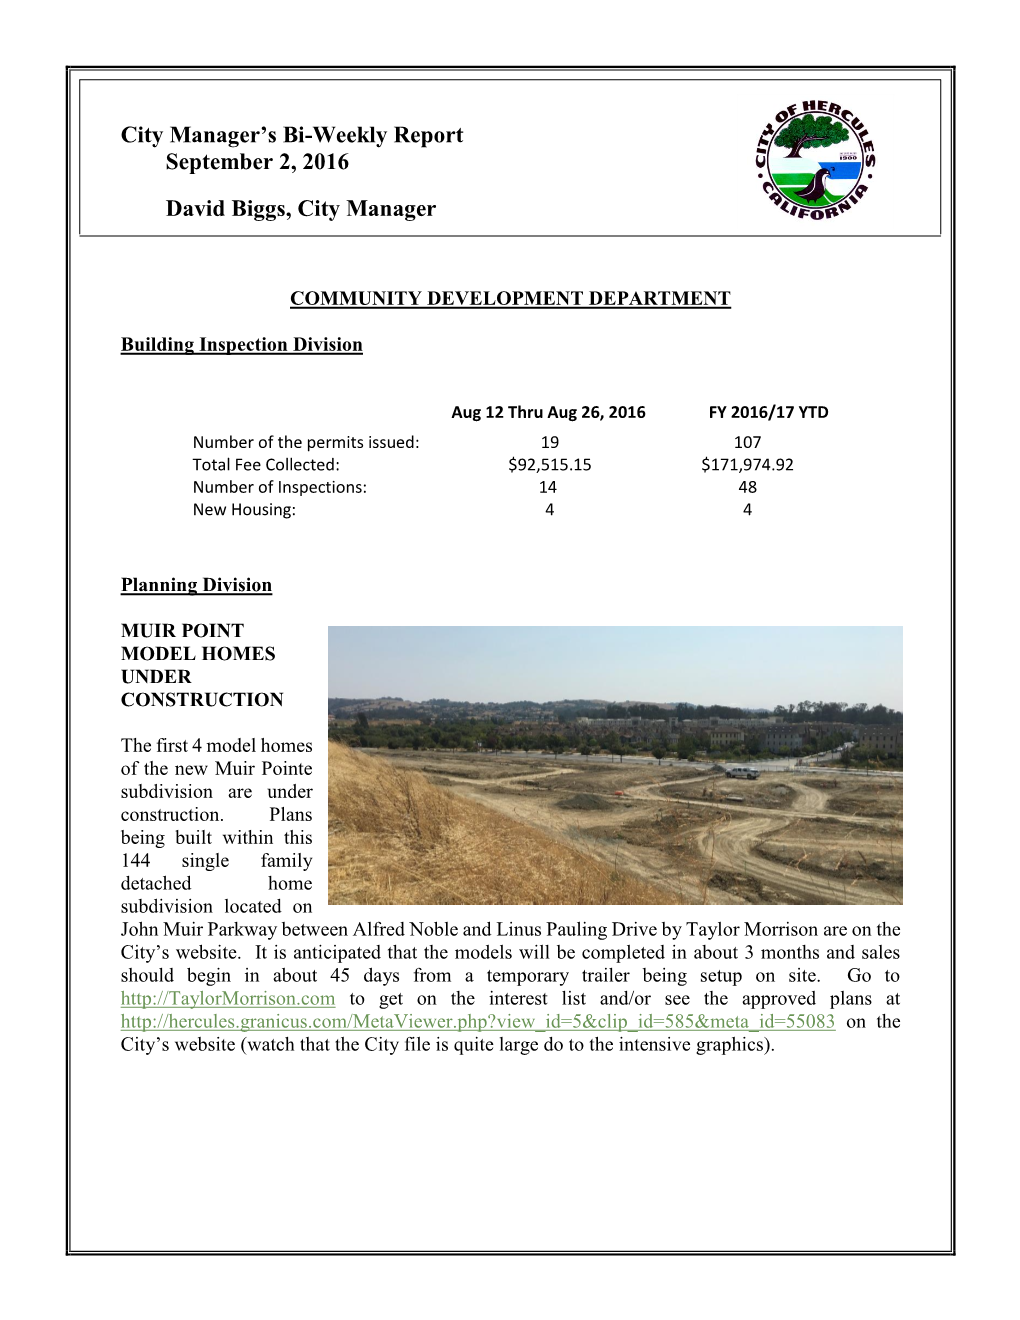 City Manager's Report 09-02-16